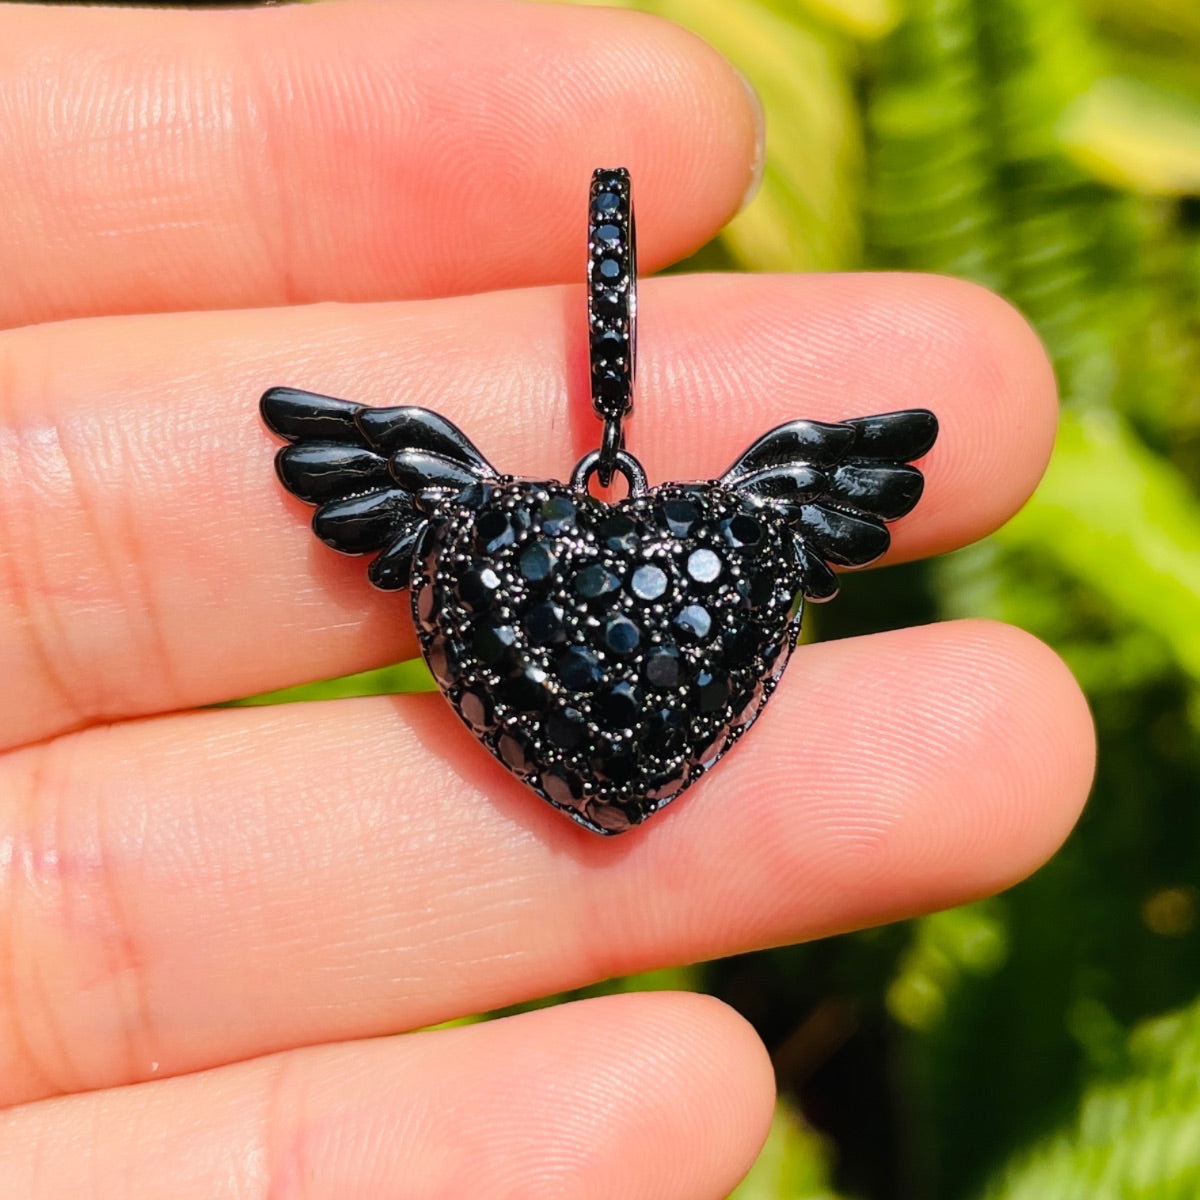 10pcs/lot 29.2*18.6mm CZ Paved Angel Wing 3D Heart Charms Black on Black CZ Paved Charms Hearts New Charms Arrivals Charms Beads Beyond